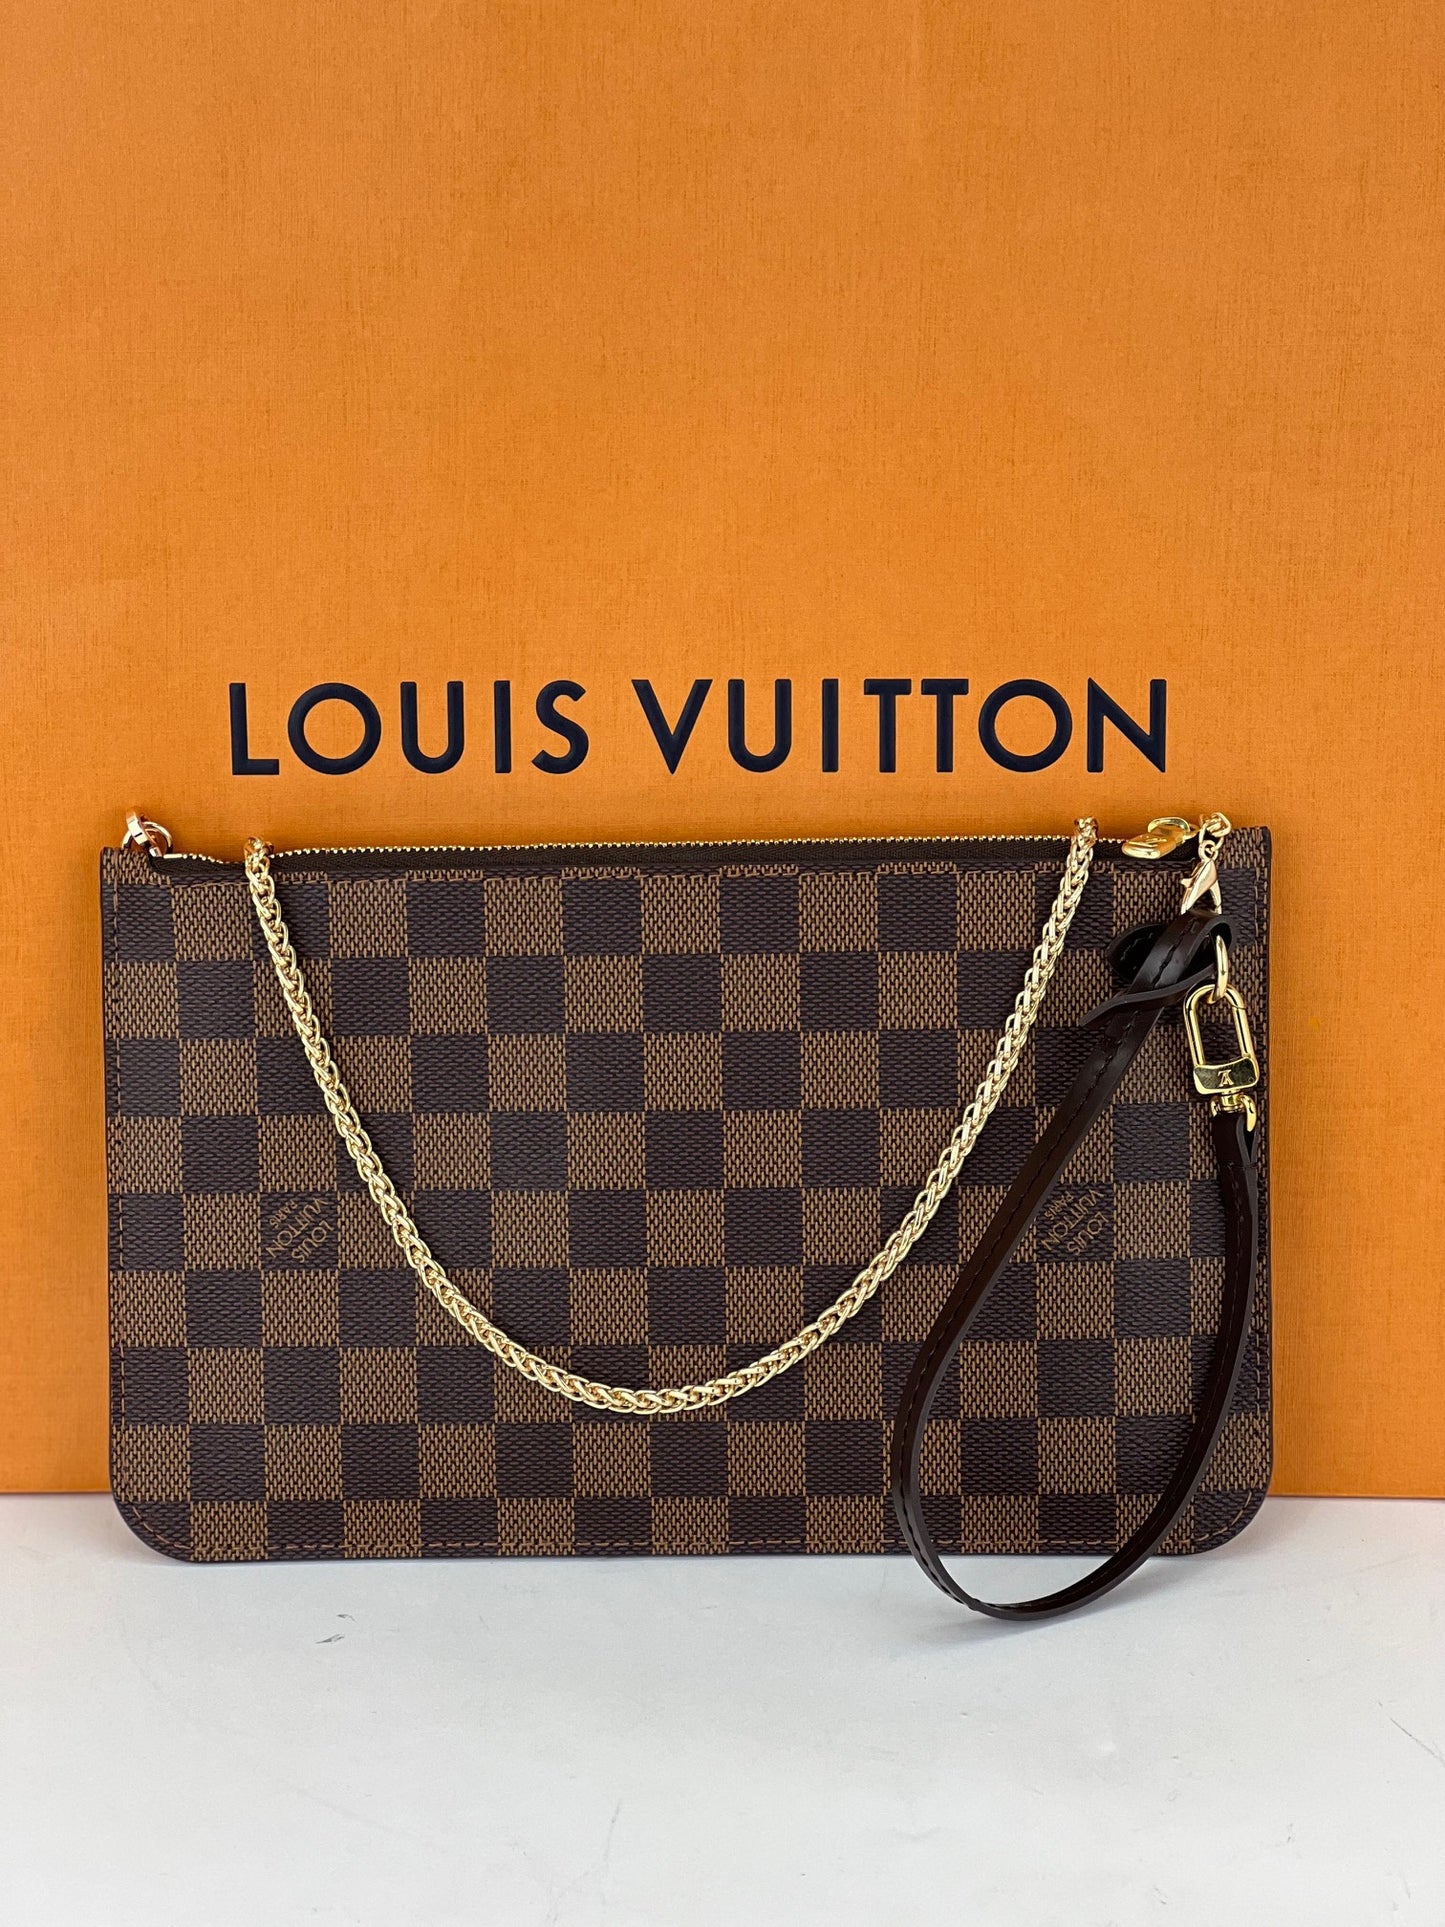 Louis Vuitton Neverfull Pochette Review and Unique Uses